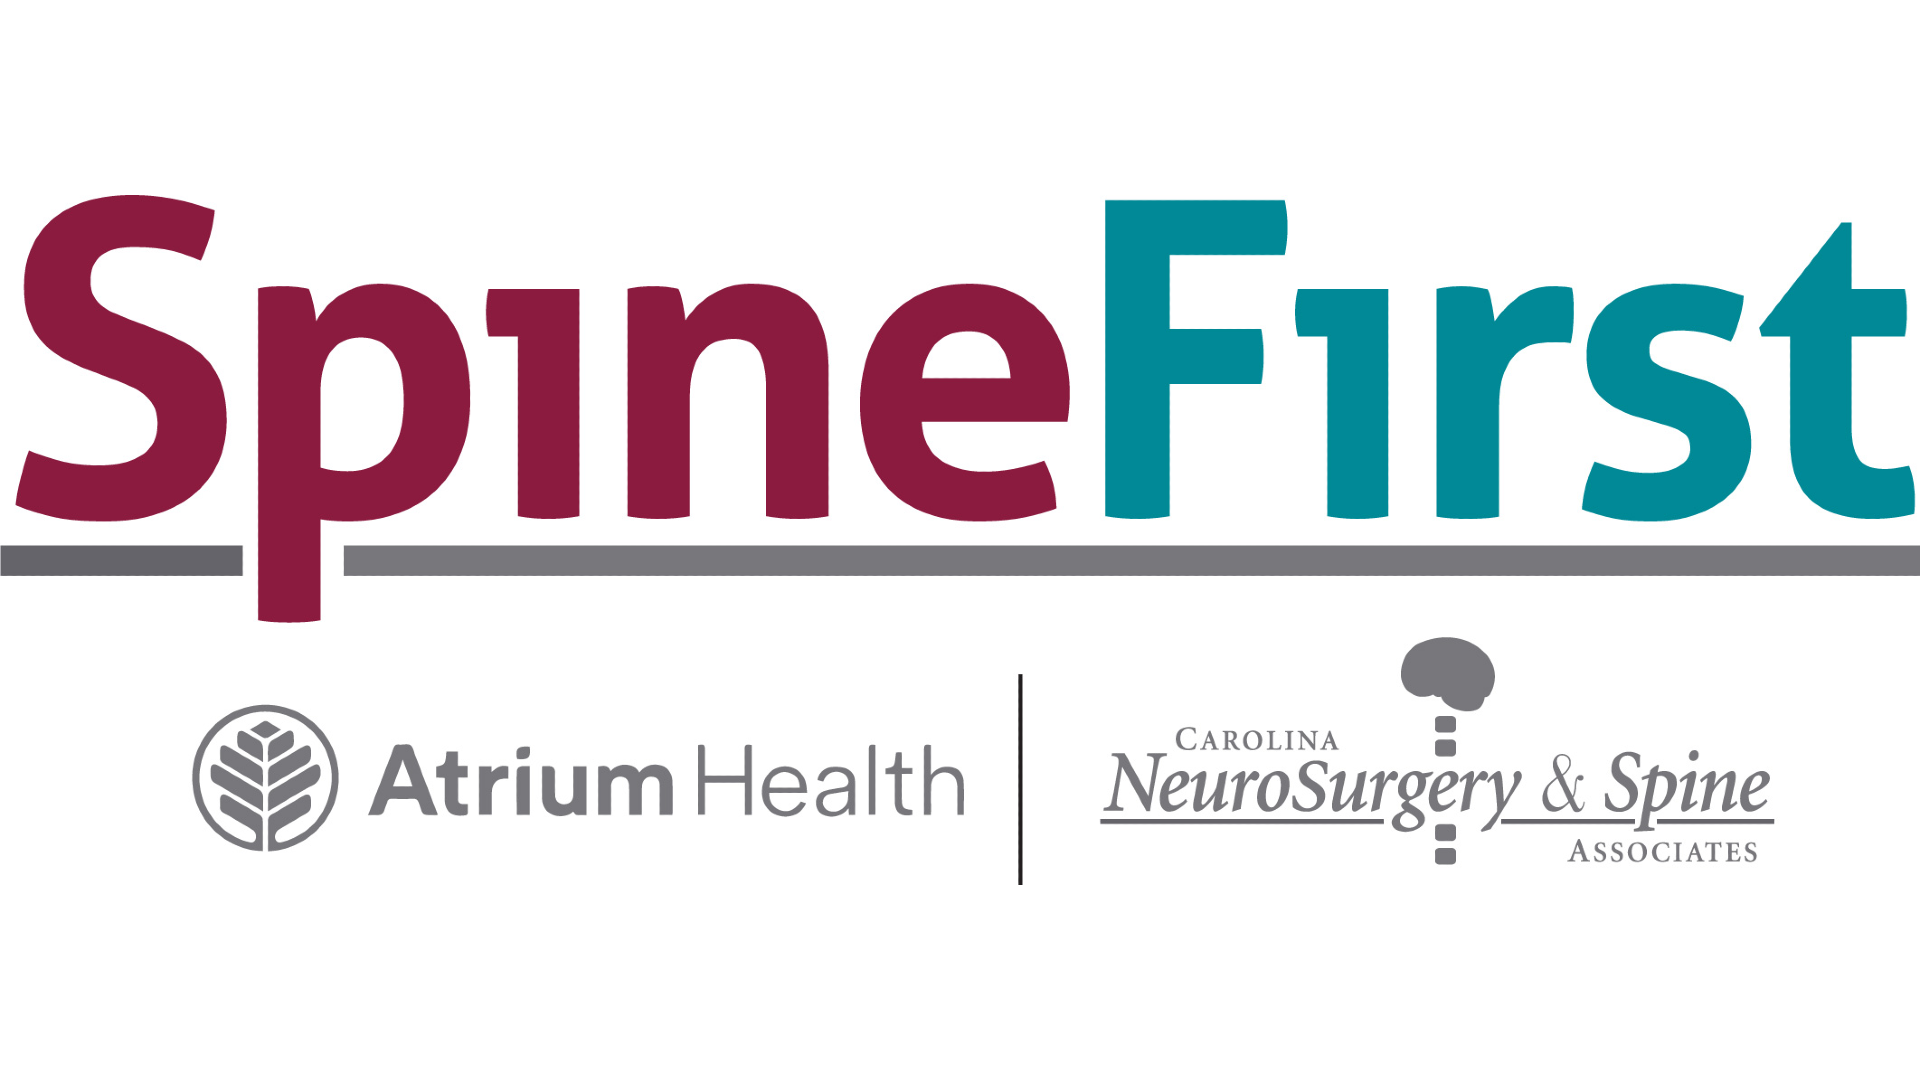 Atrium Health and Carolina NeuroSurgery & Spine Associates Announce a New Joint Venture to Revolutionize the Delivery of Spine Care in the Region 